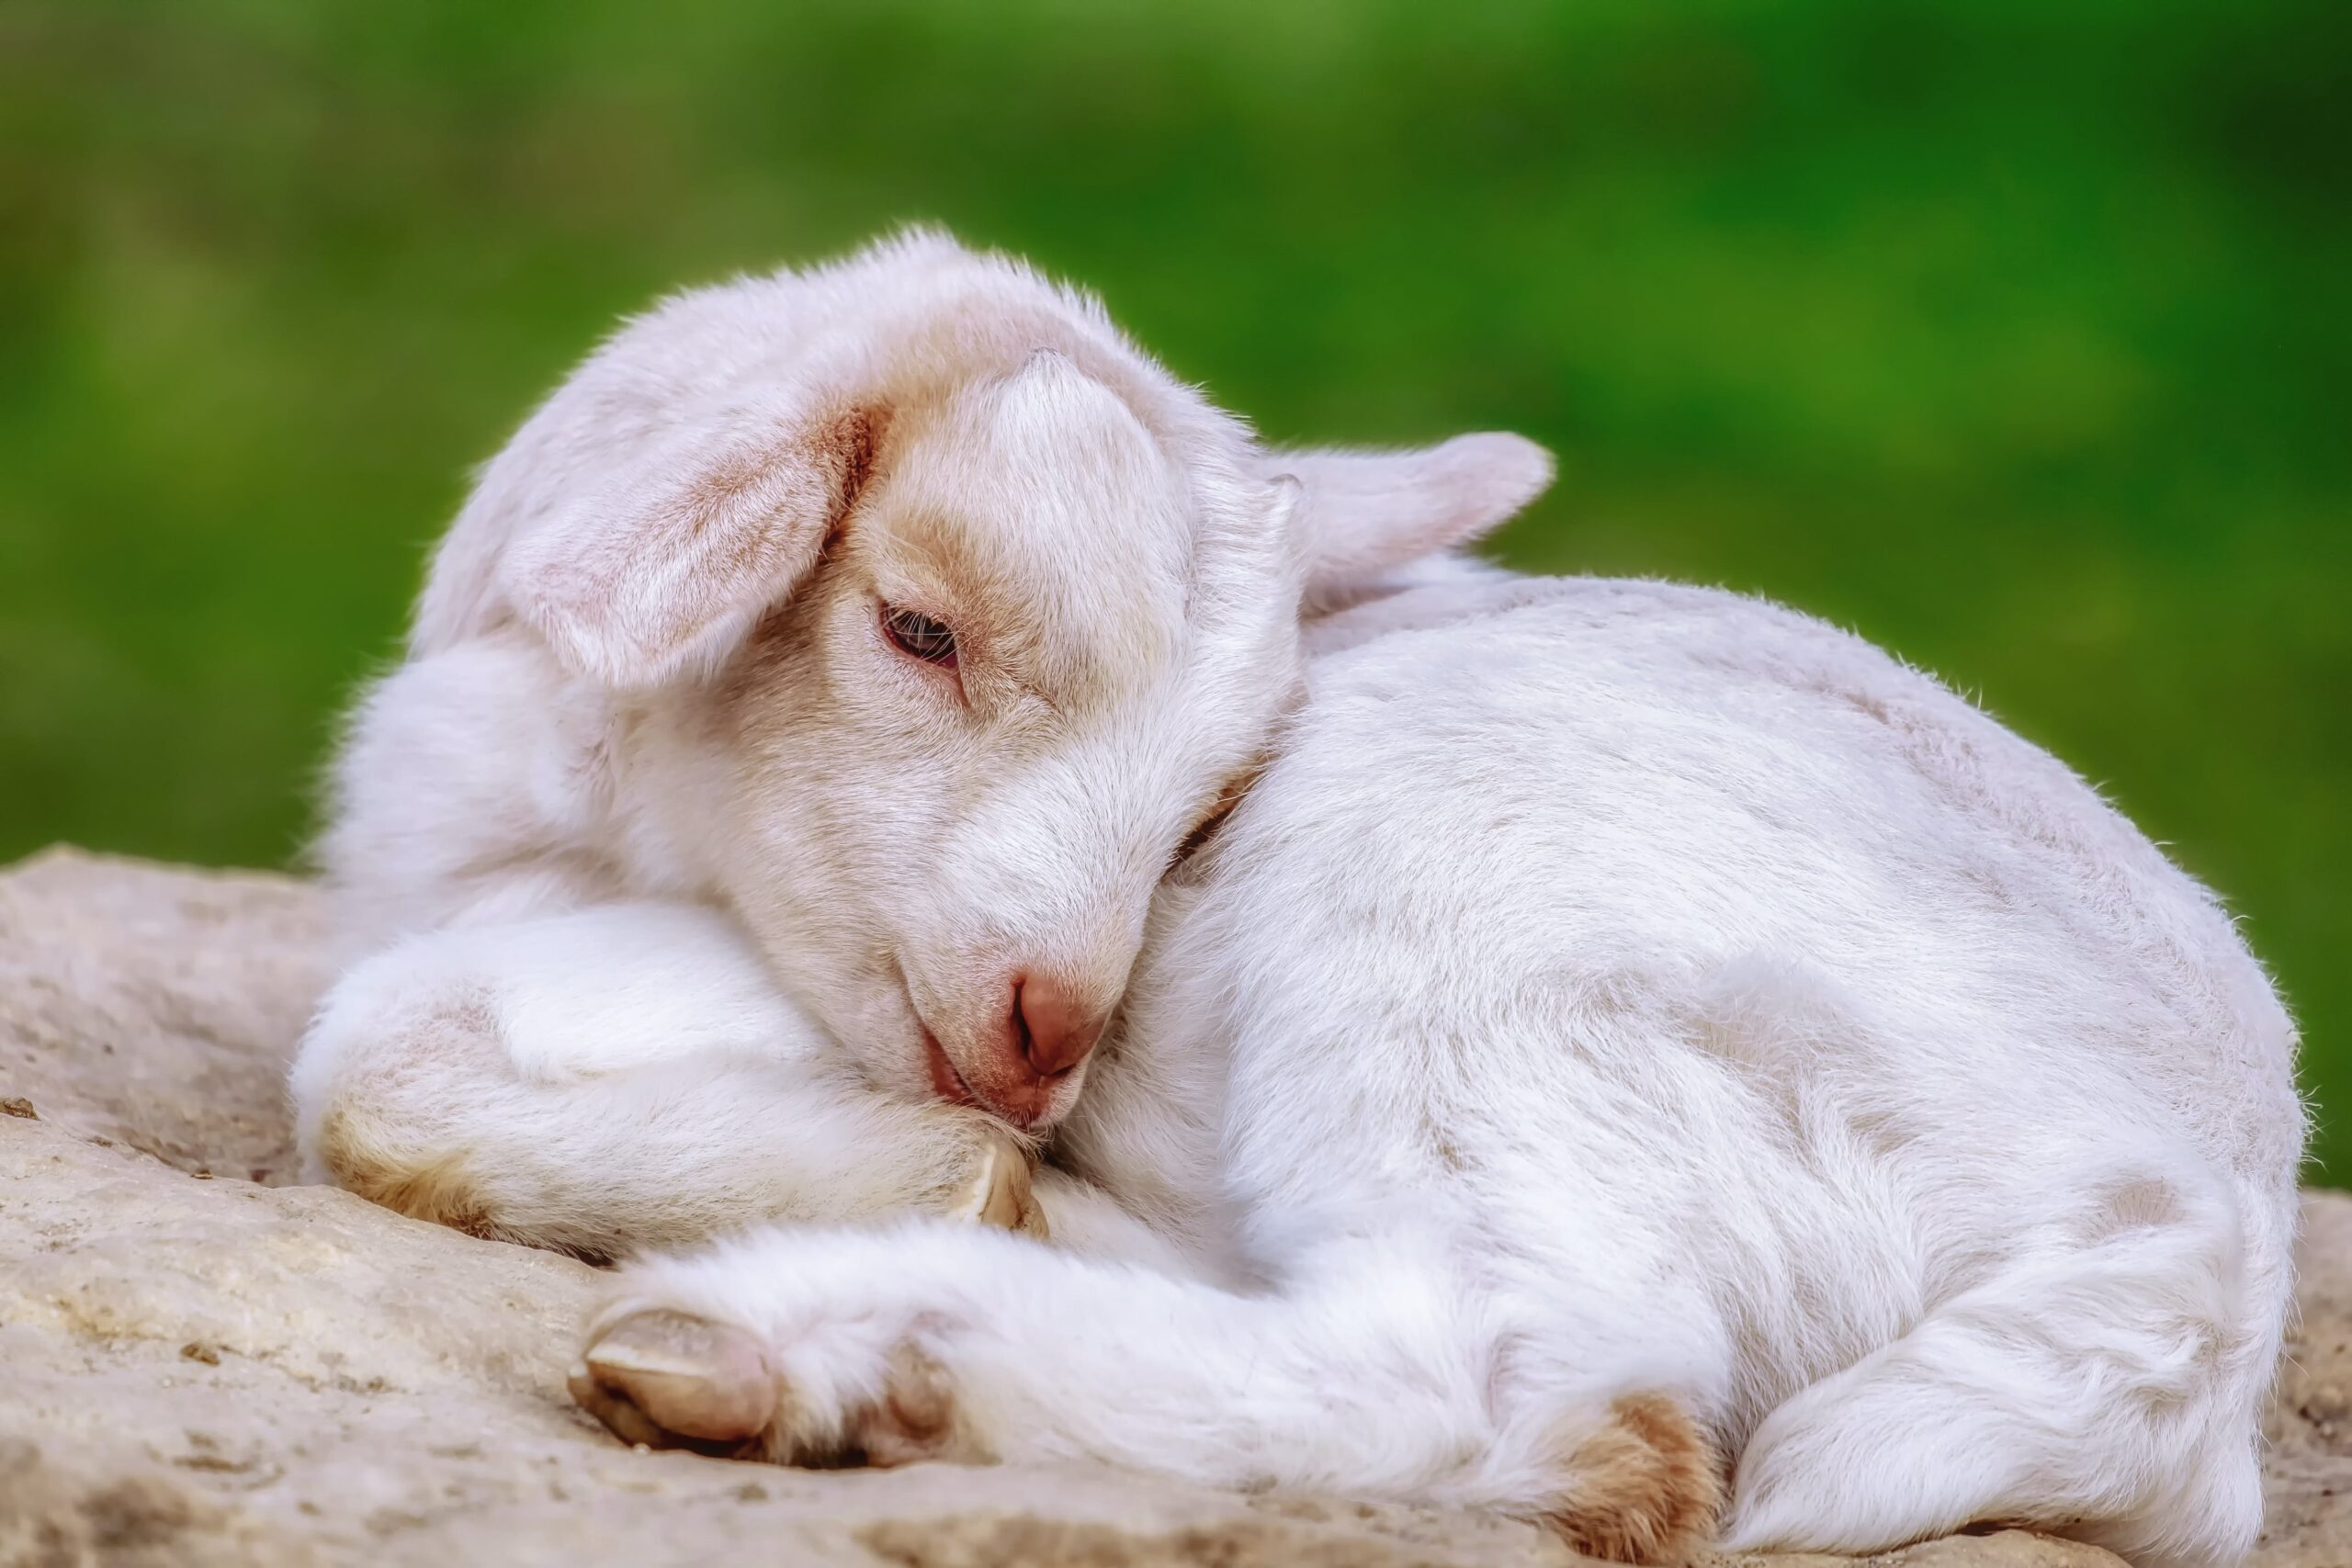 Healthy young goat kid sleeping in a curled up posture.